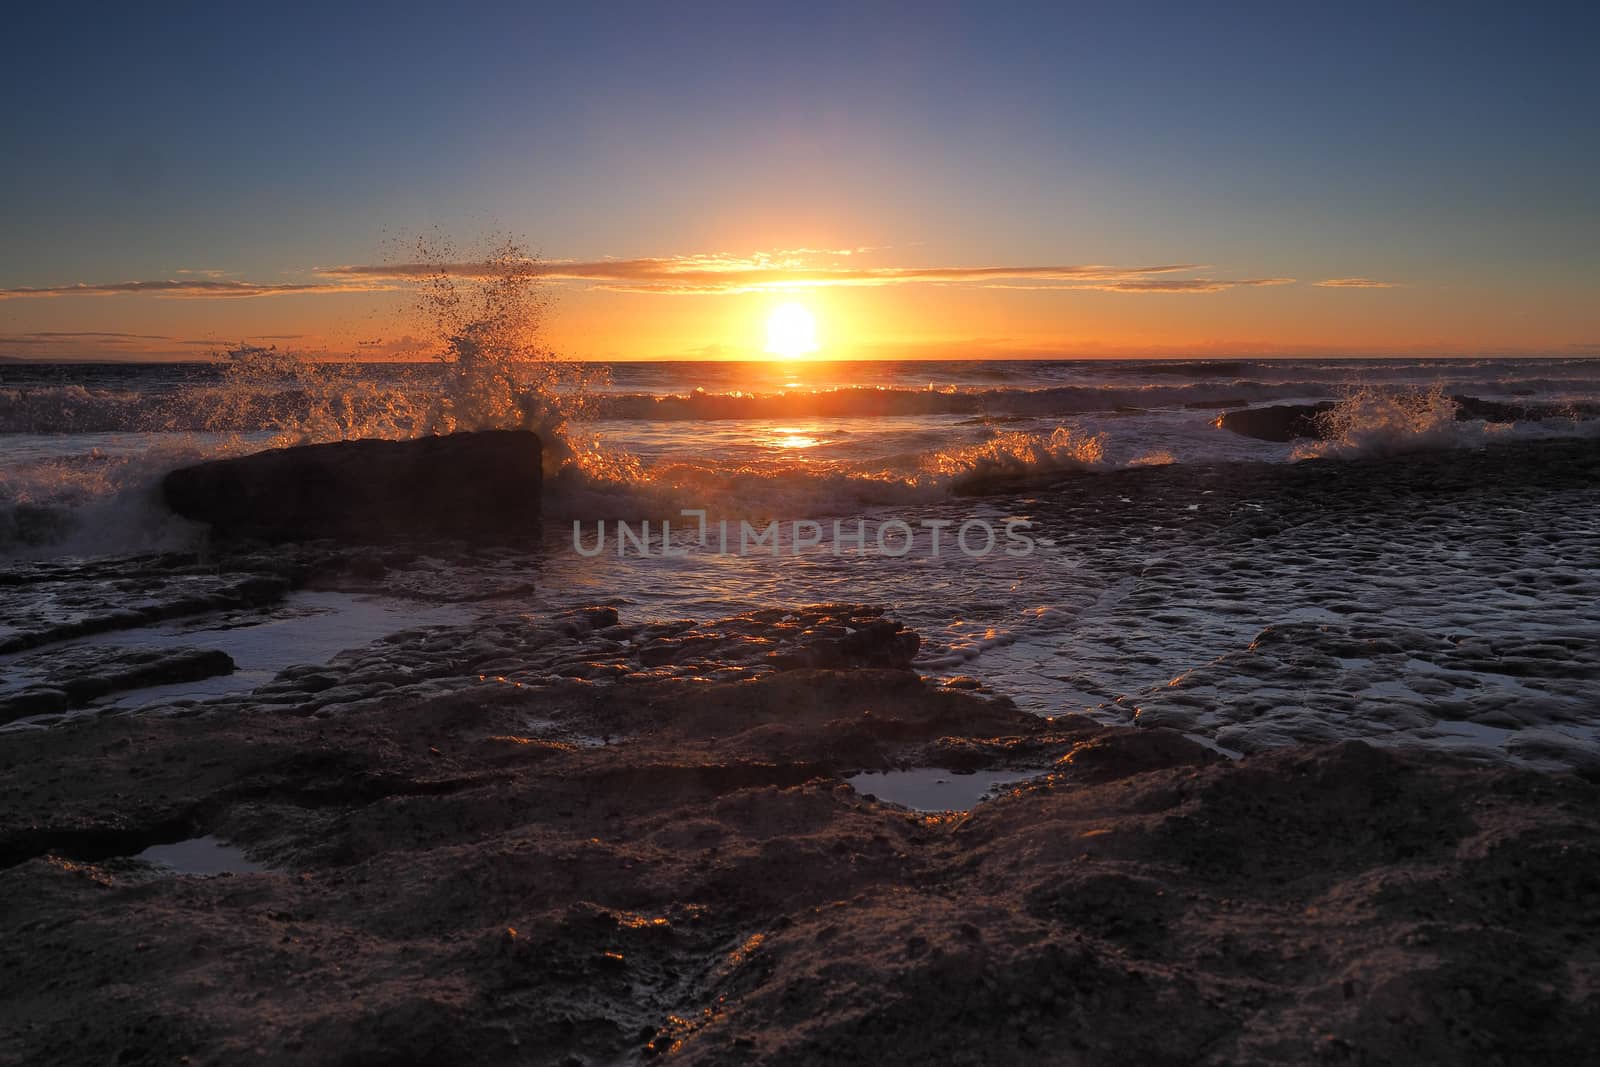 Stunning sunset with orange clouds and spray in the air from the waves crashing onto the limestone pavement of rocks on the beach at Dunraven Bay, Vale of Glamorgan, South Wales